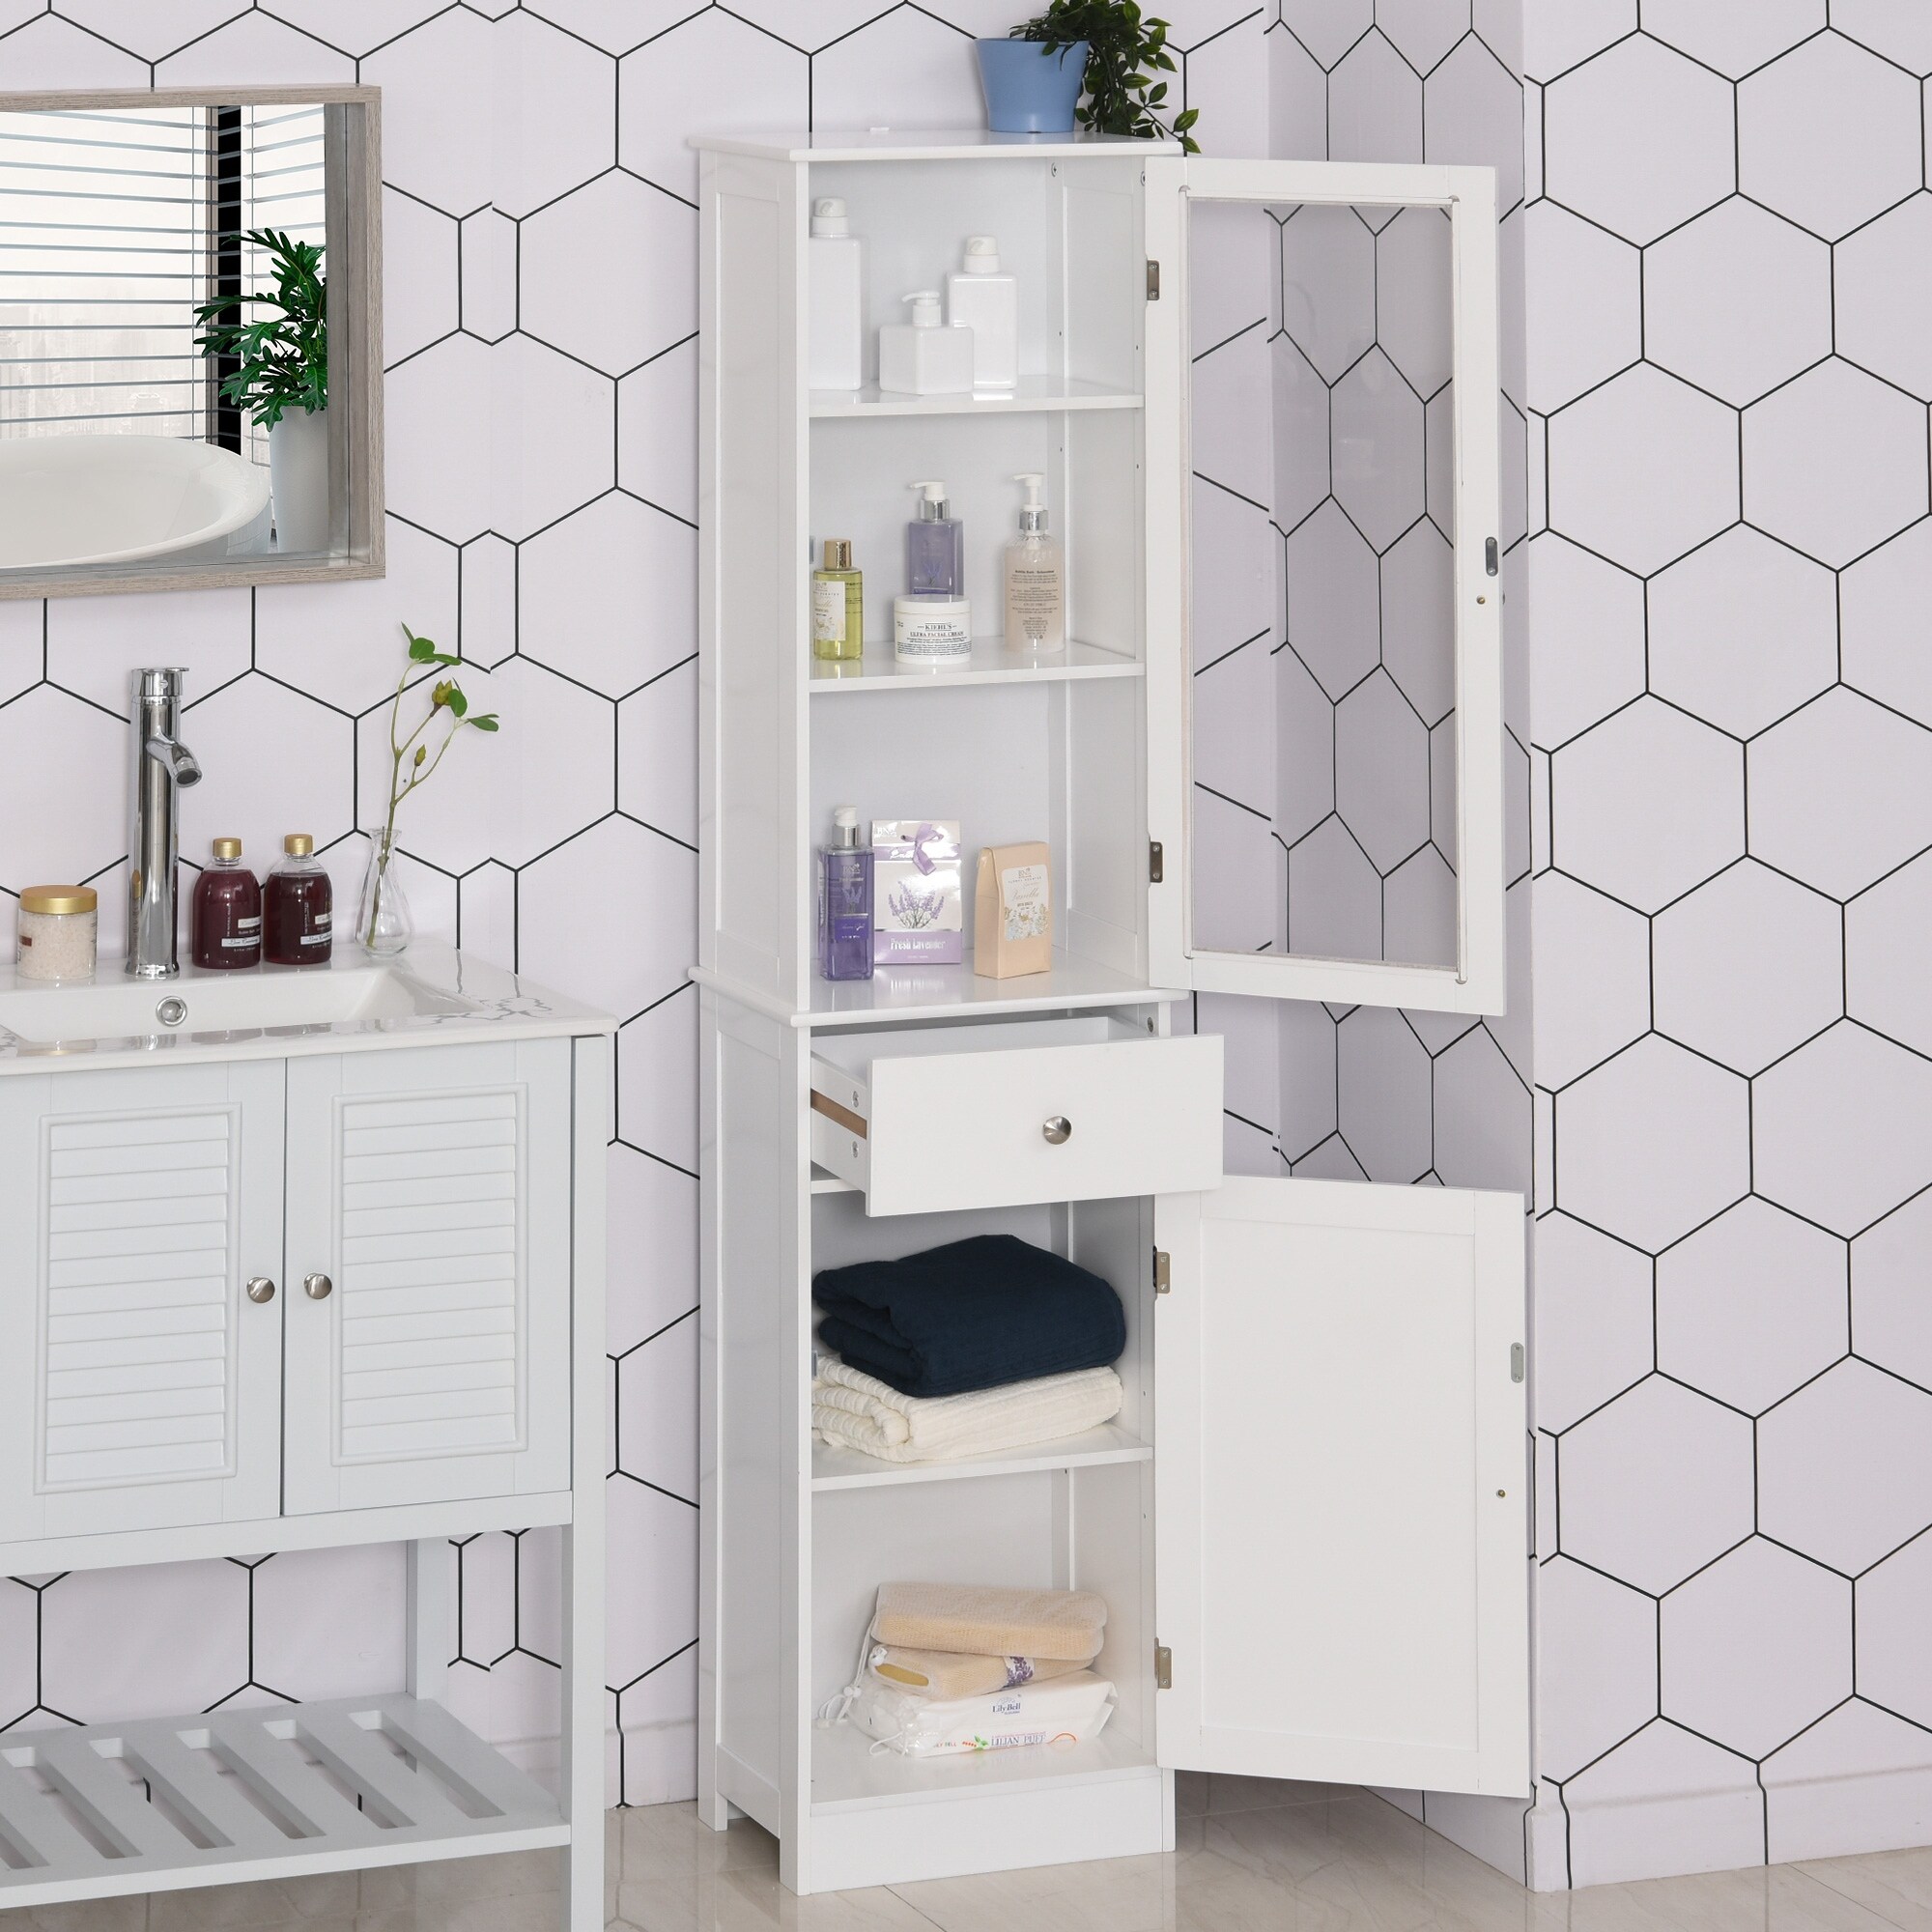 https://ak1.ostkcdn.com/images/products/is/images/direct/6e7595c7f38cb152565f084079588678355ee47a/kleankin-Storage-Cabinet-with-Doors-and-Shelves---Perfect-for-Bathroom-Living-Room-Kitchen-or-Office-Space%2C-White.jpg